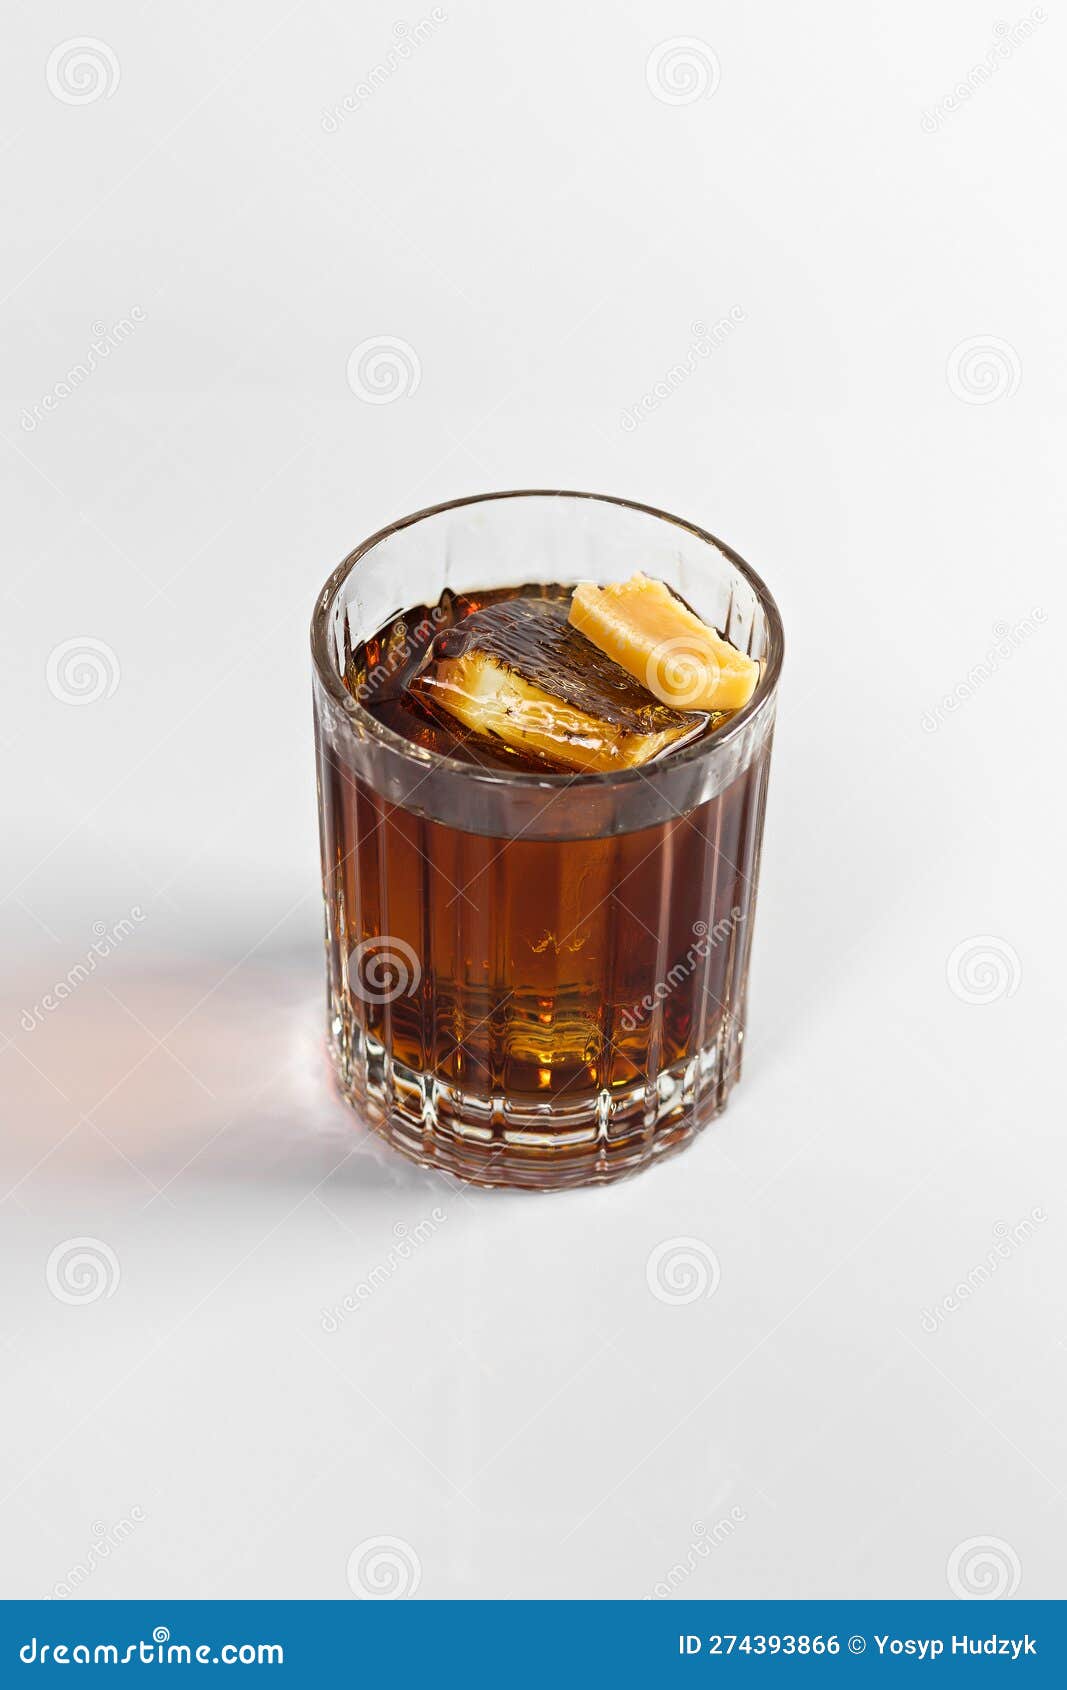 https://thumbs.dreamstime.com/z/whiskey-cola-cocktail-decorated-large-ice-cube-caramel-white-isolated-background-274393866.jpg